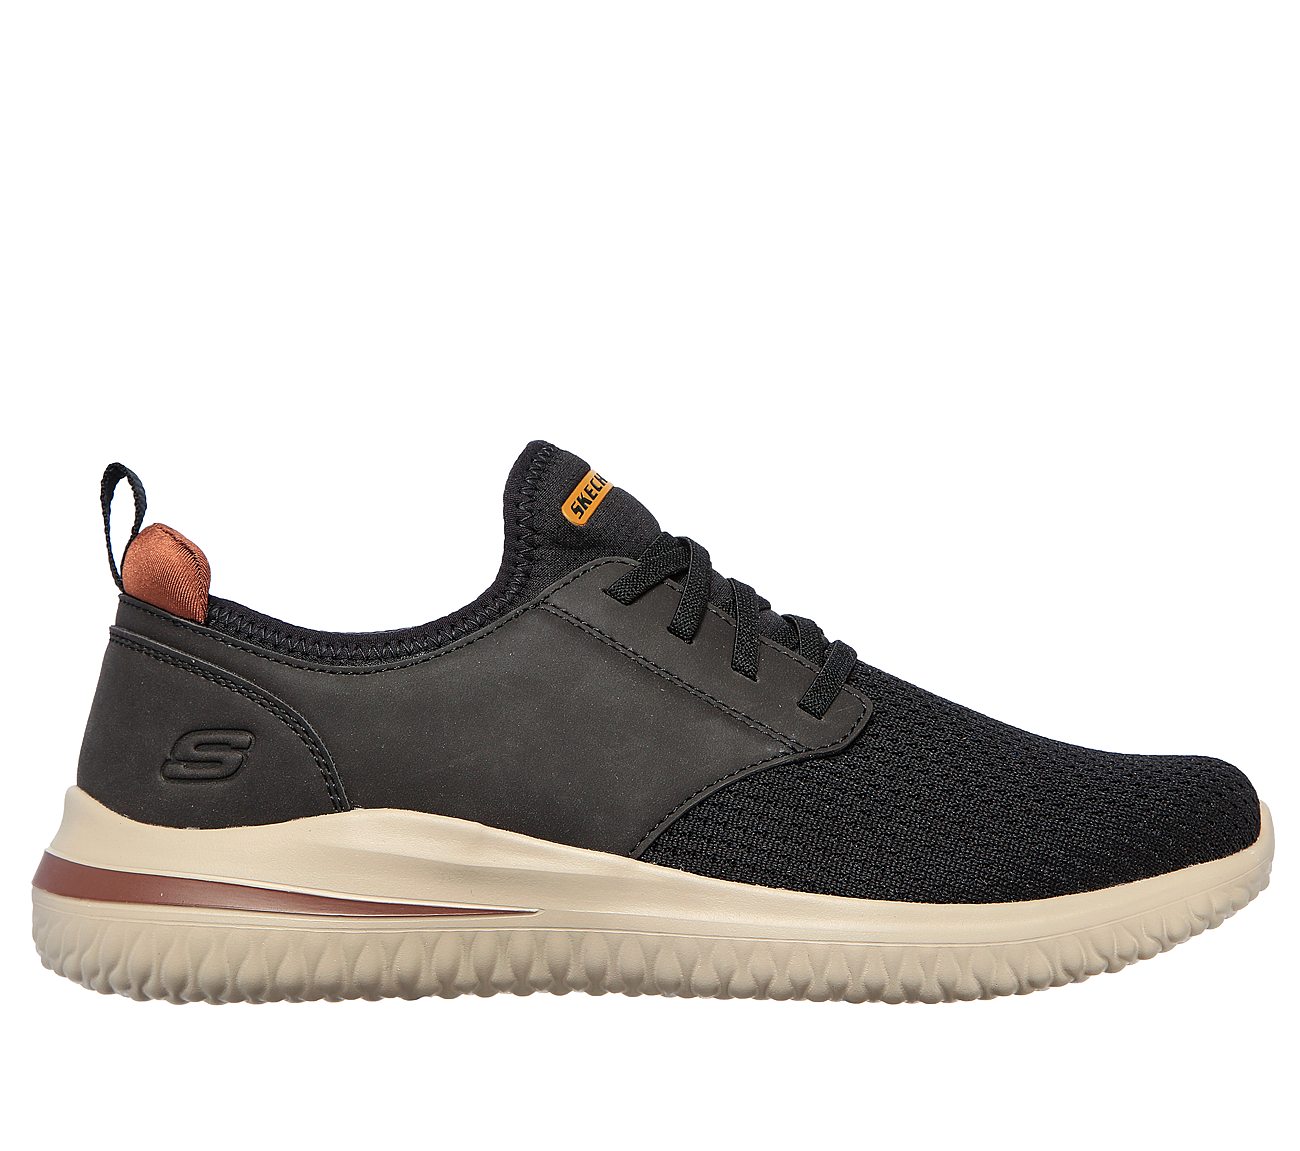 DELSON 3.0 - MOONEY, BBBBLACK Footwear Lateral View